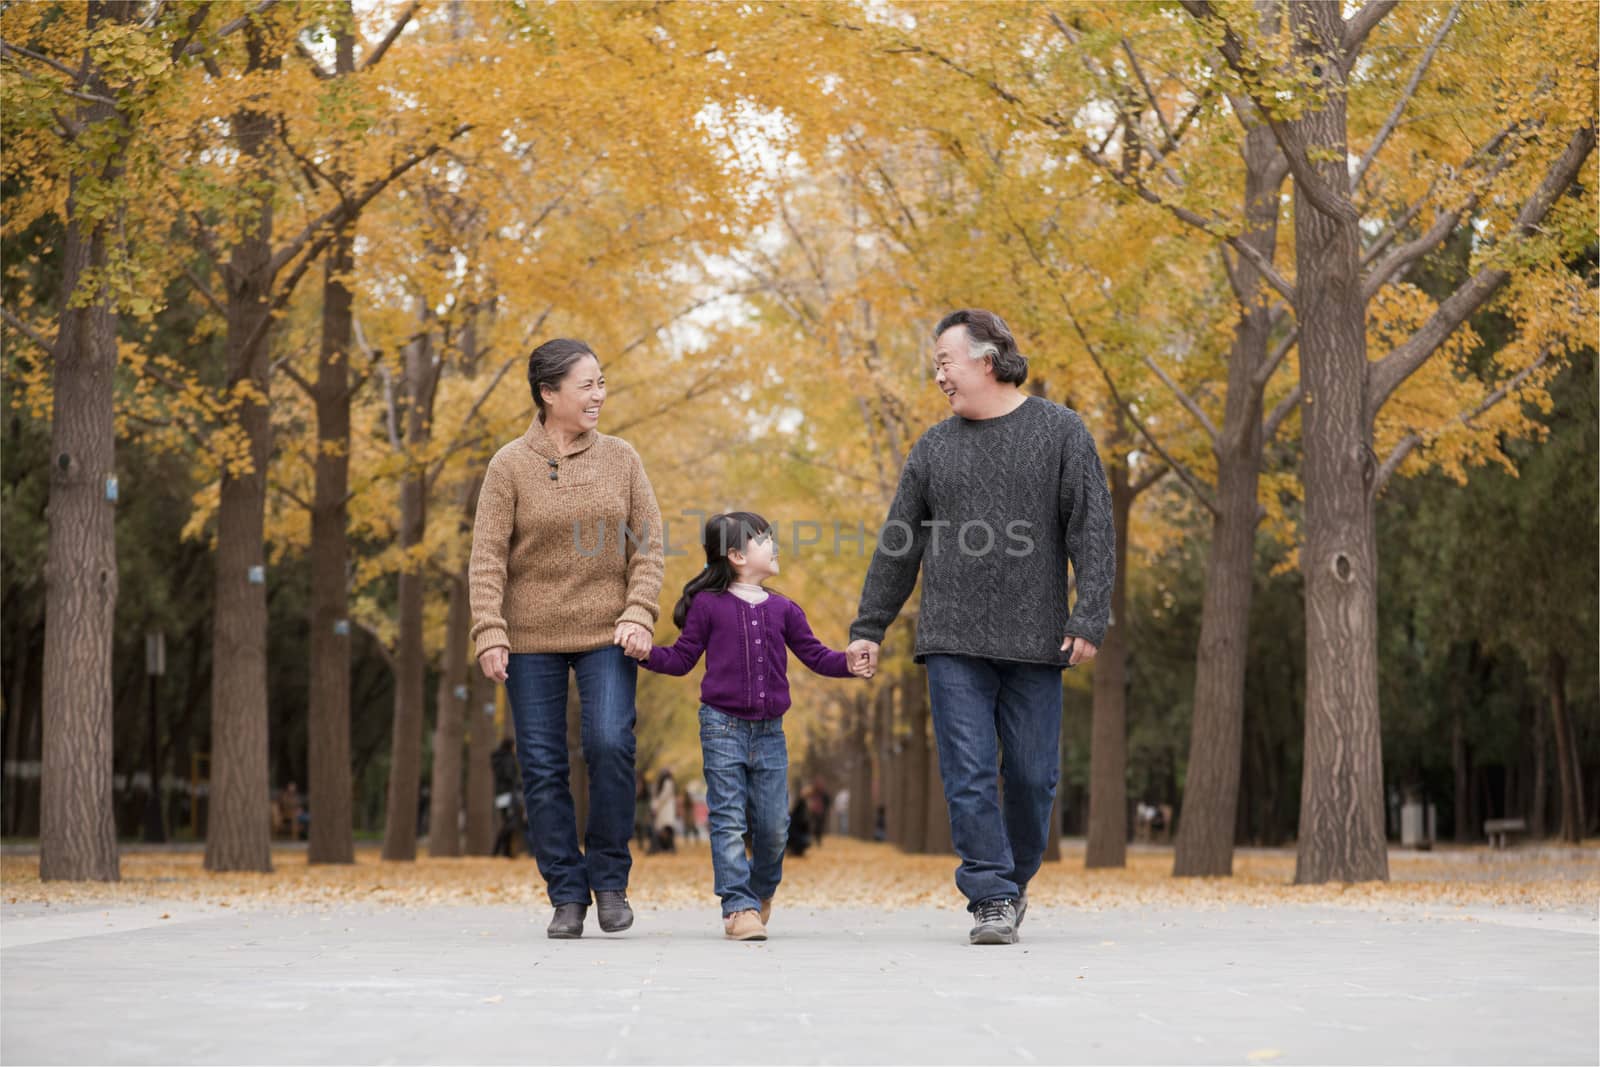 Grandparents and granddaughter playing in park